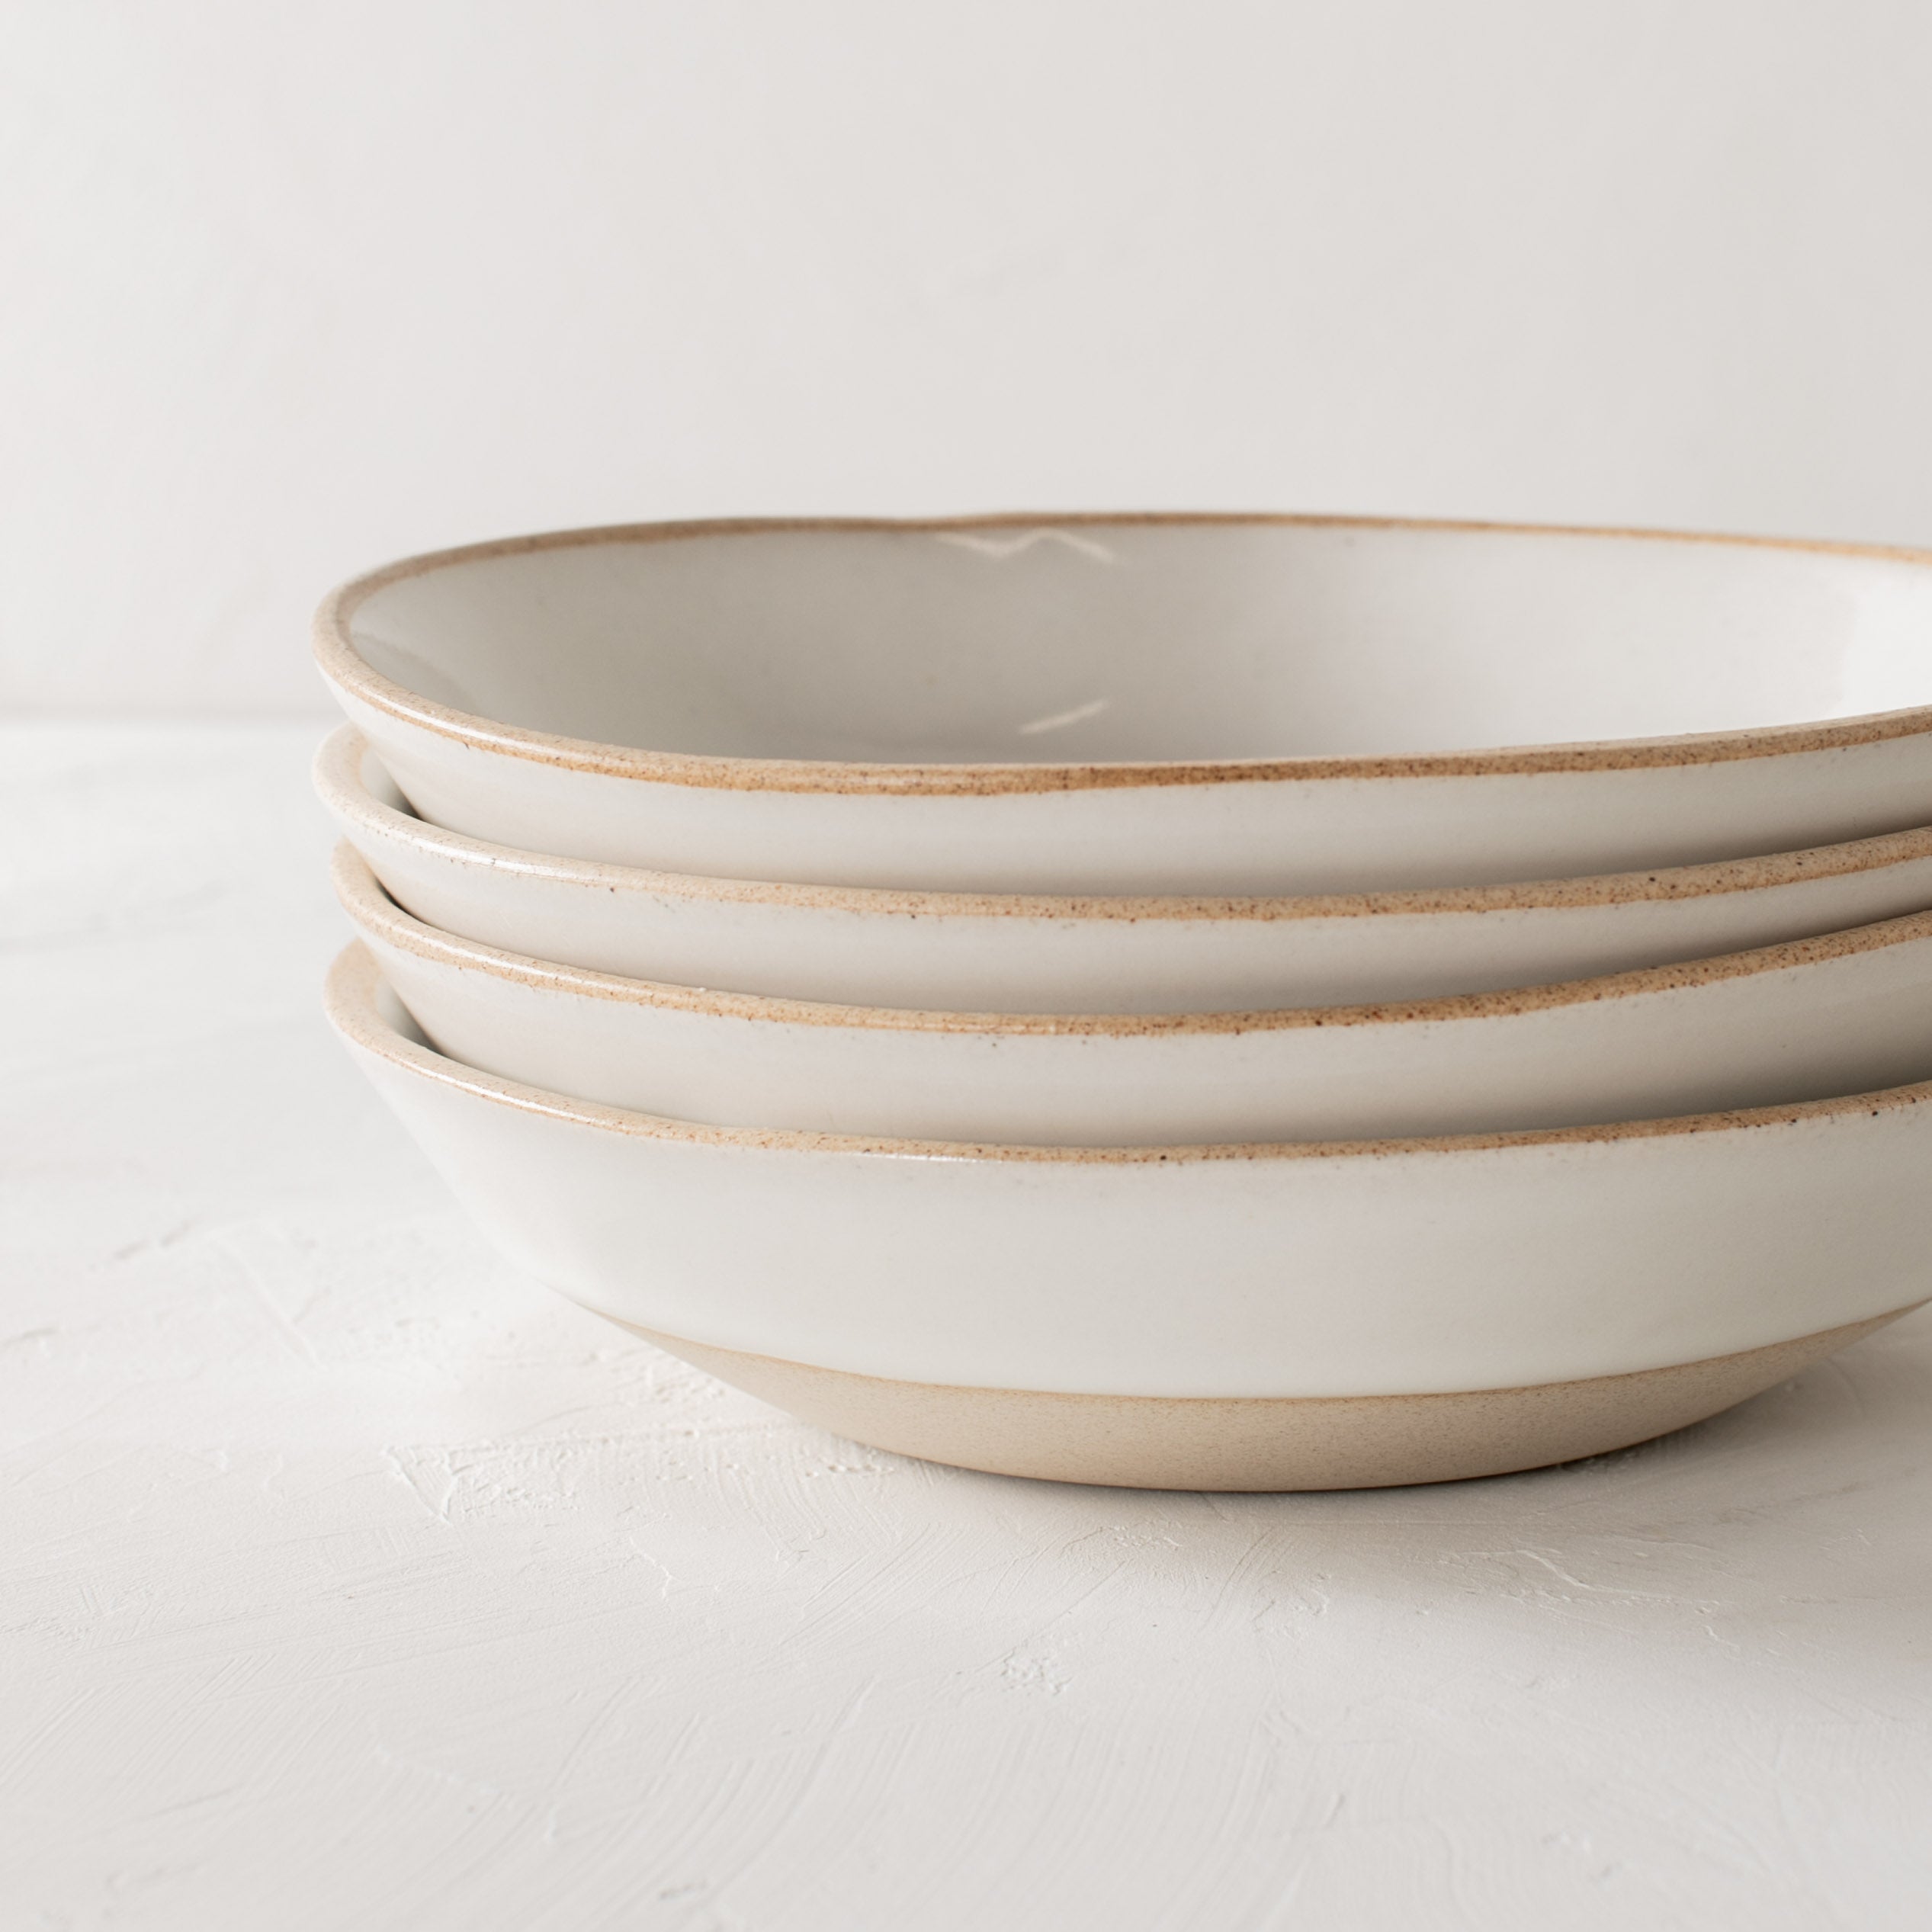 Stack of four minimal white ceramic minimal pasta bowls, close up image. Bowls have an exposed stoneware rime and base. Handmade pasta bowl designed and sold by Convivial Production, Kansas City ceramics.